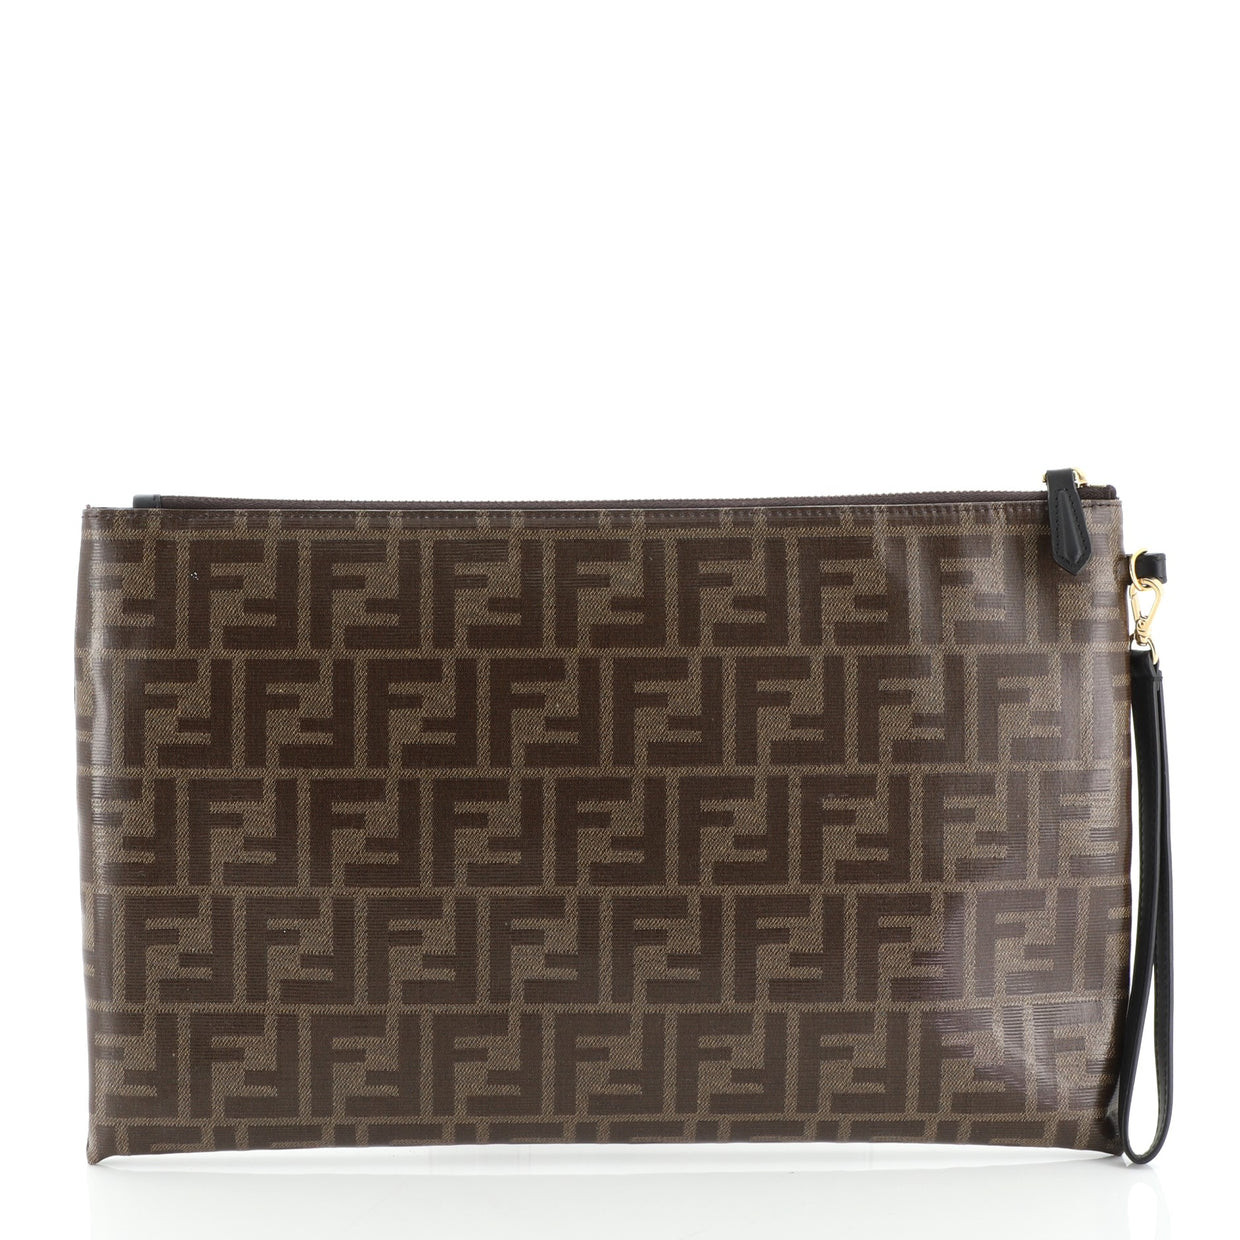 Fendi Double F Zip Pouch Zucca Coated Canvas Brown 508141